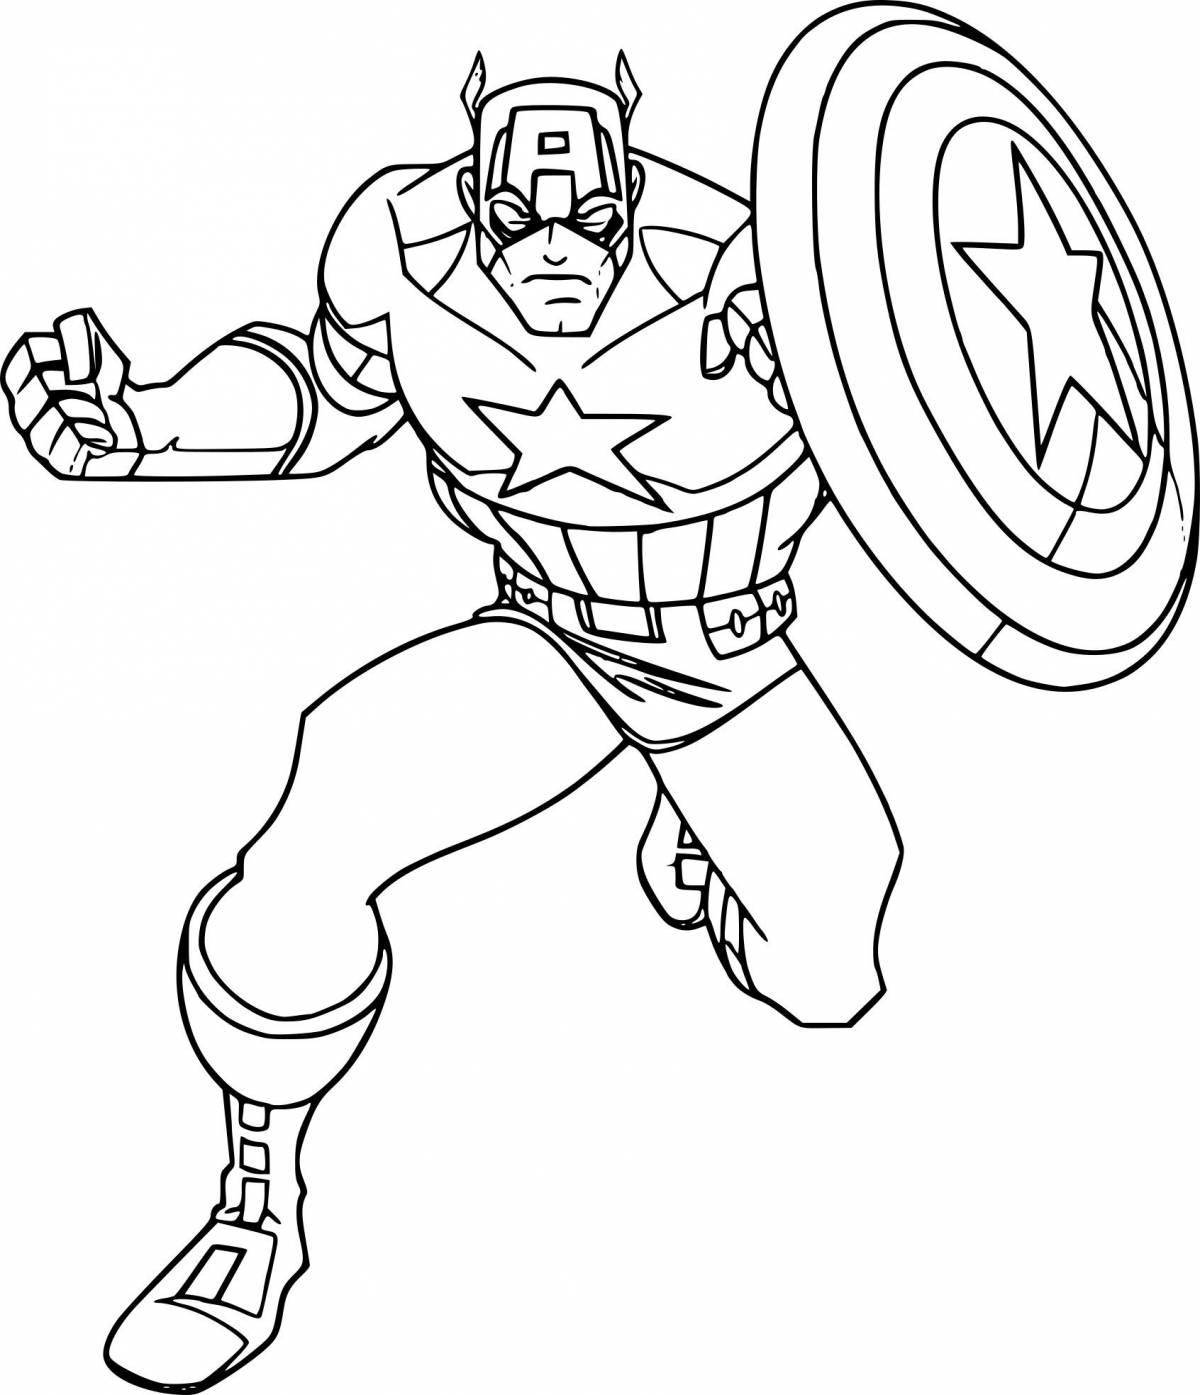 Large avengers coloring book for boys